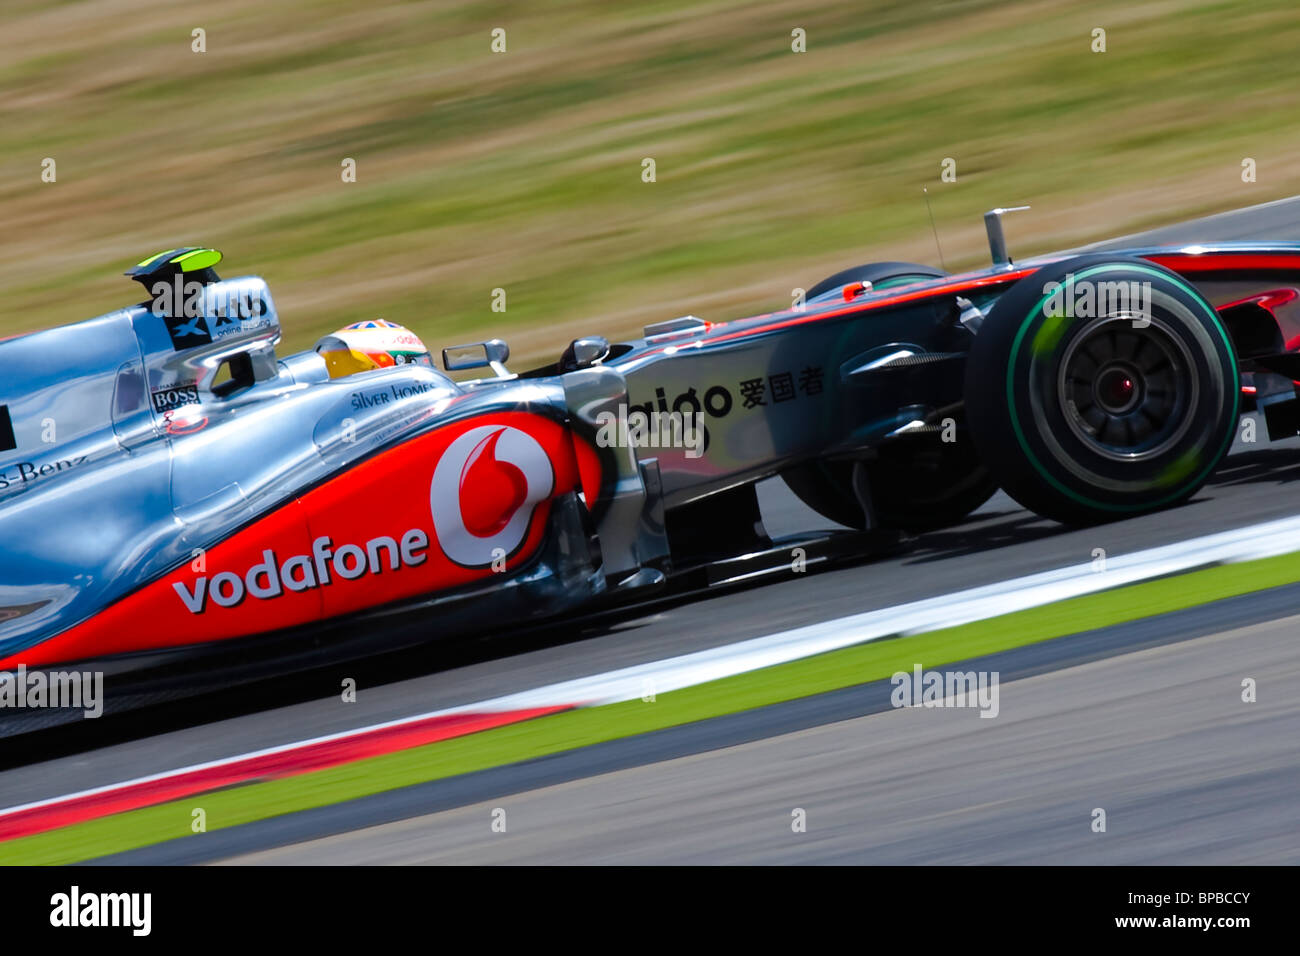 Lewis Hamilton close up at speed in the  2010 MP4-25 Vodafone Stock Photo